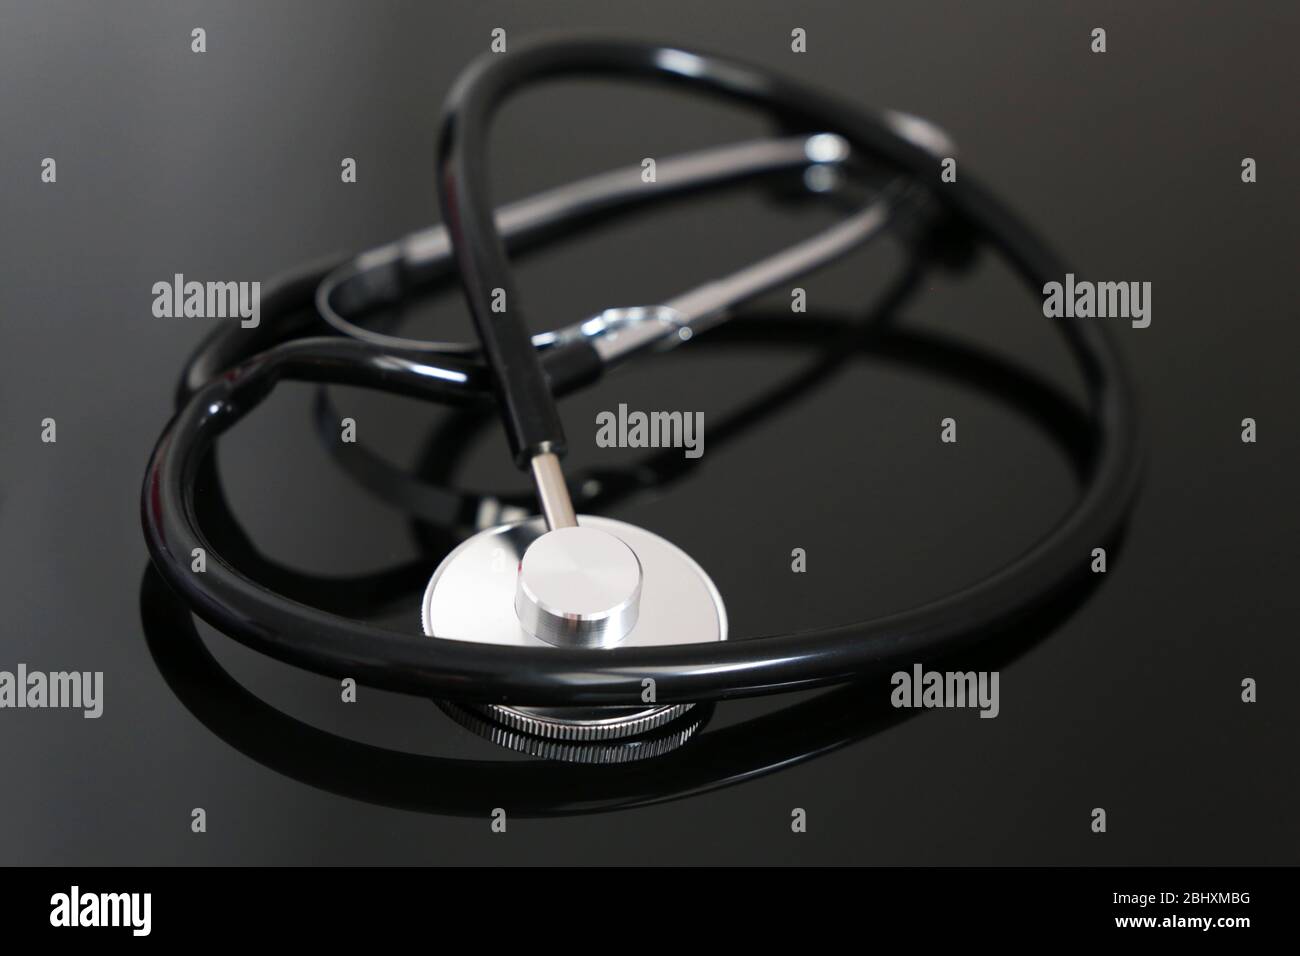 Stethoscope on dark glass table. Concept of diagnosis and health care Stock Photo